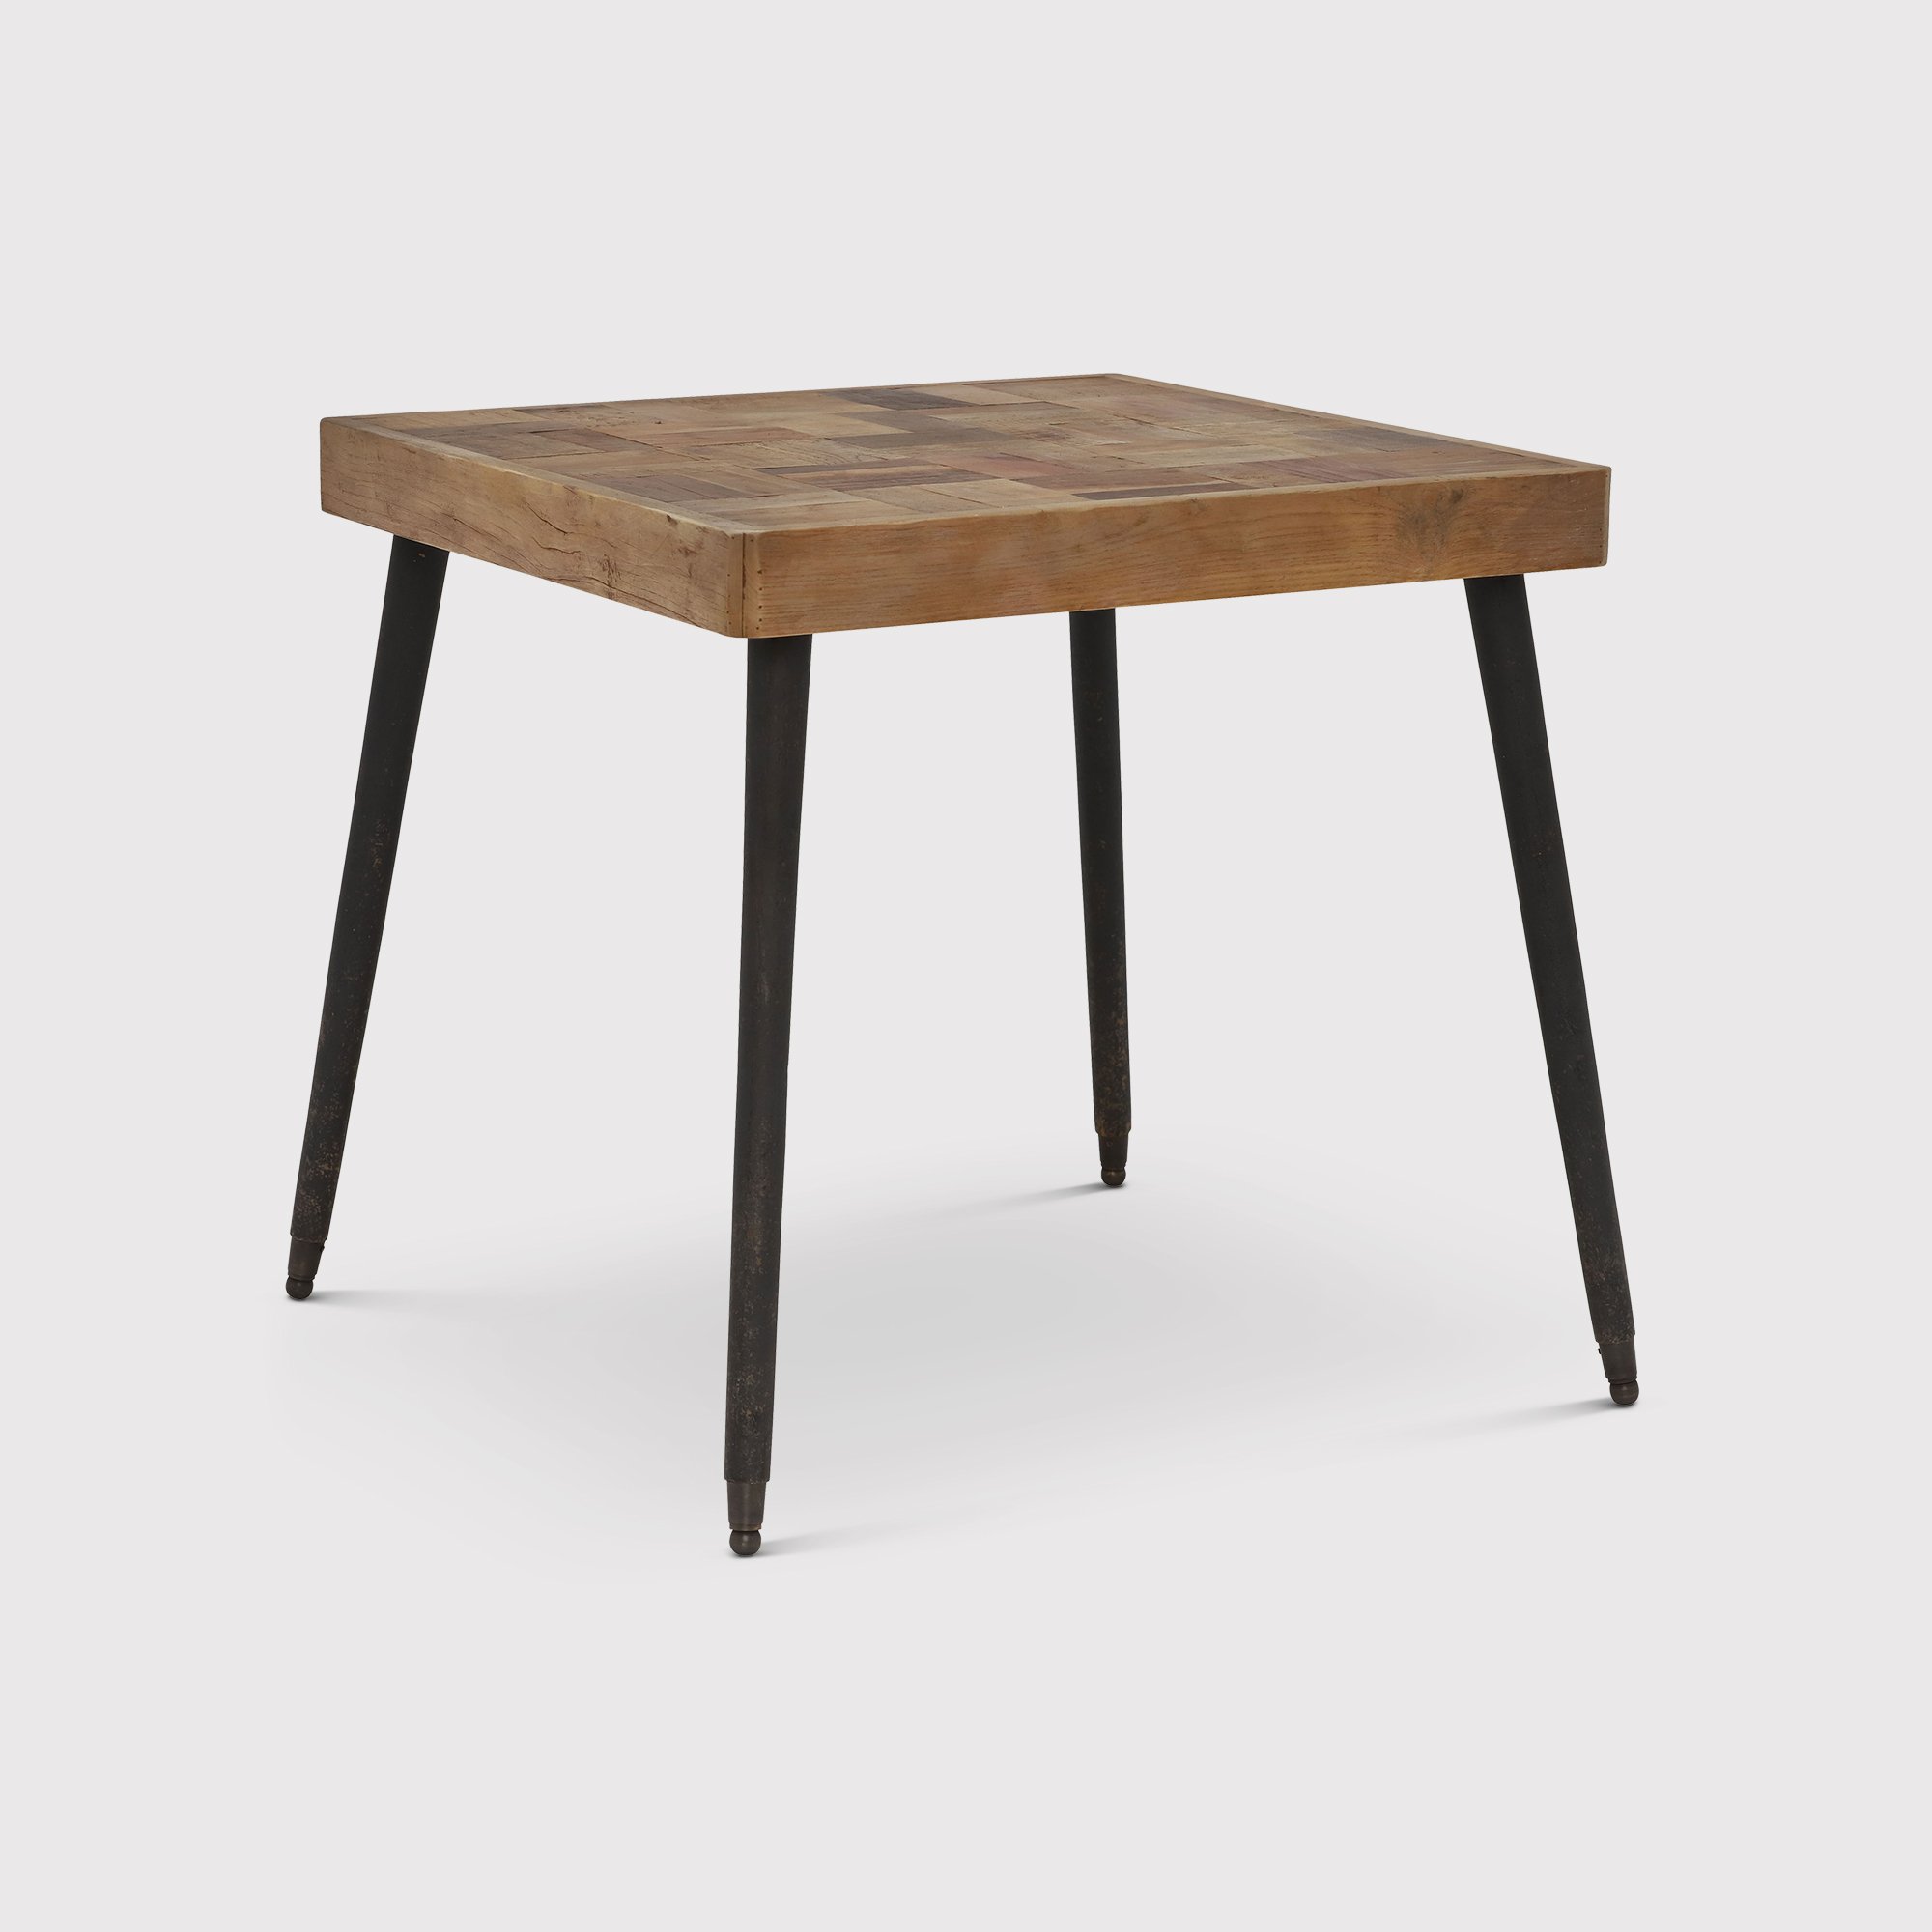 Dante Dining Table With Partuetry Inlay, Wood | Barker & Stonehouse